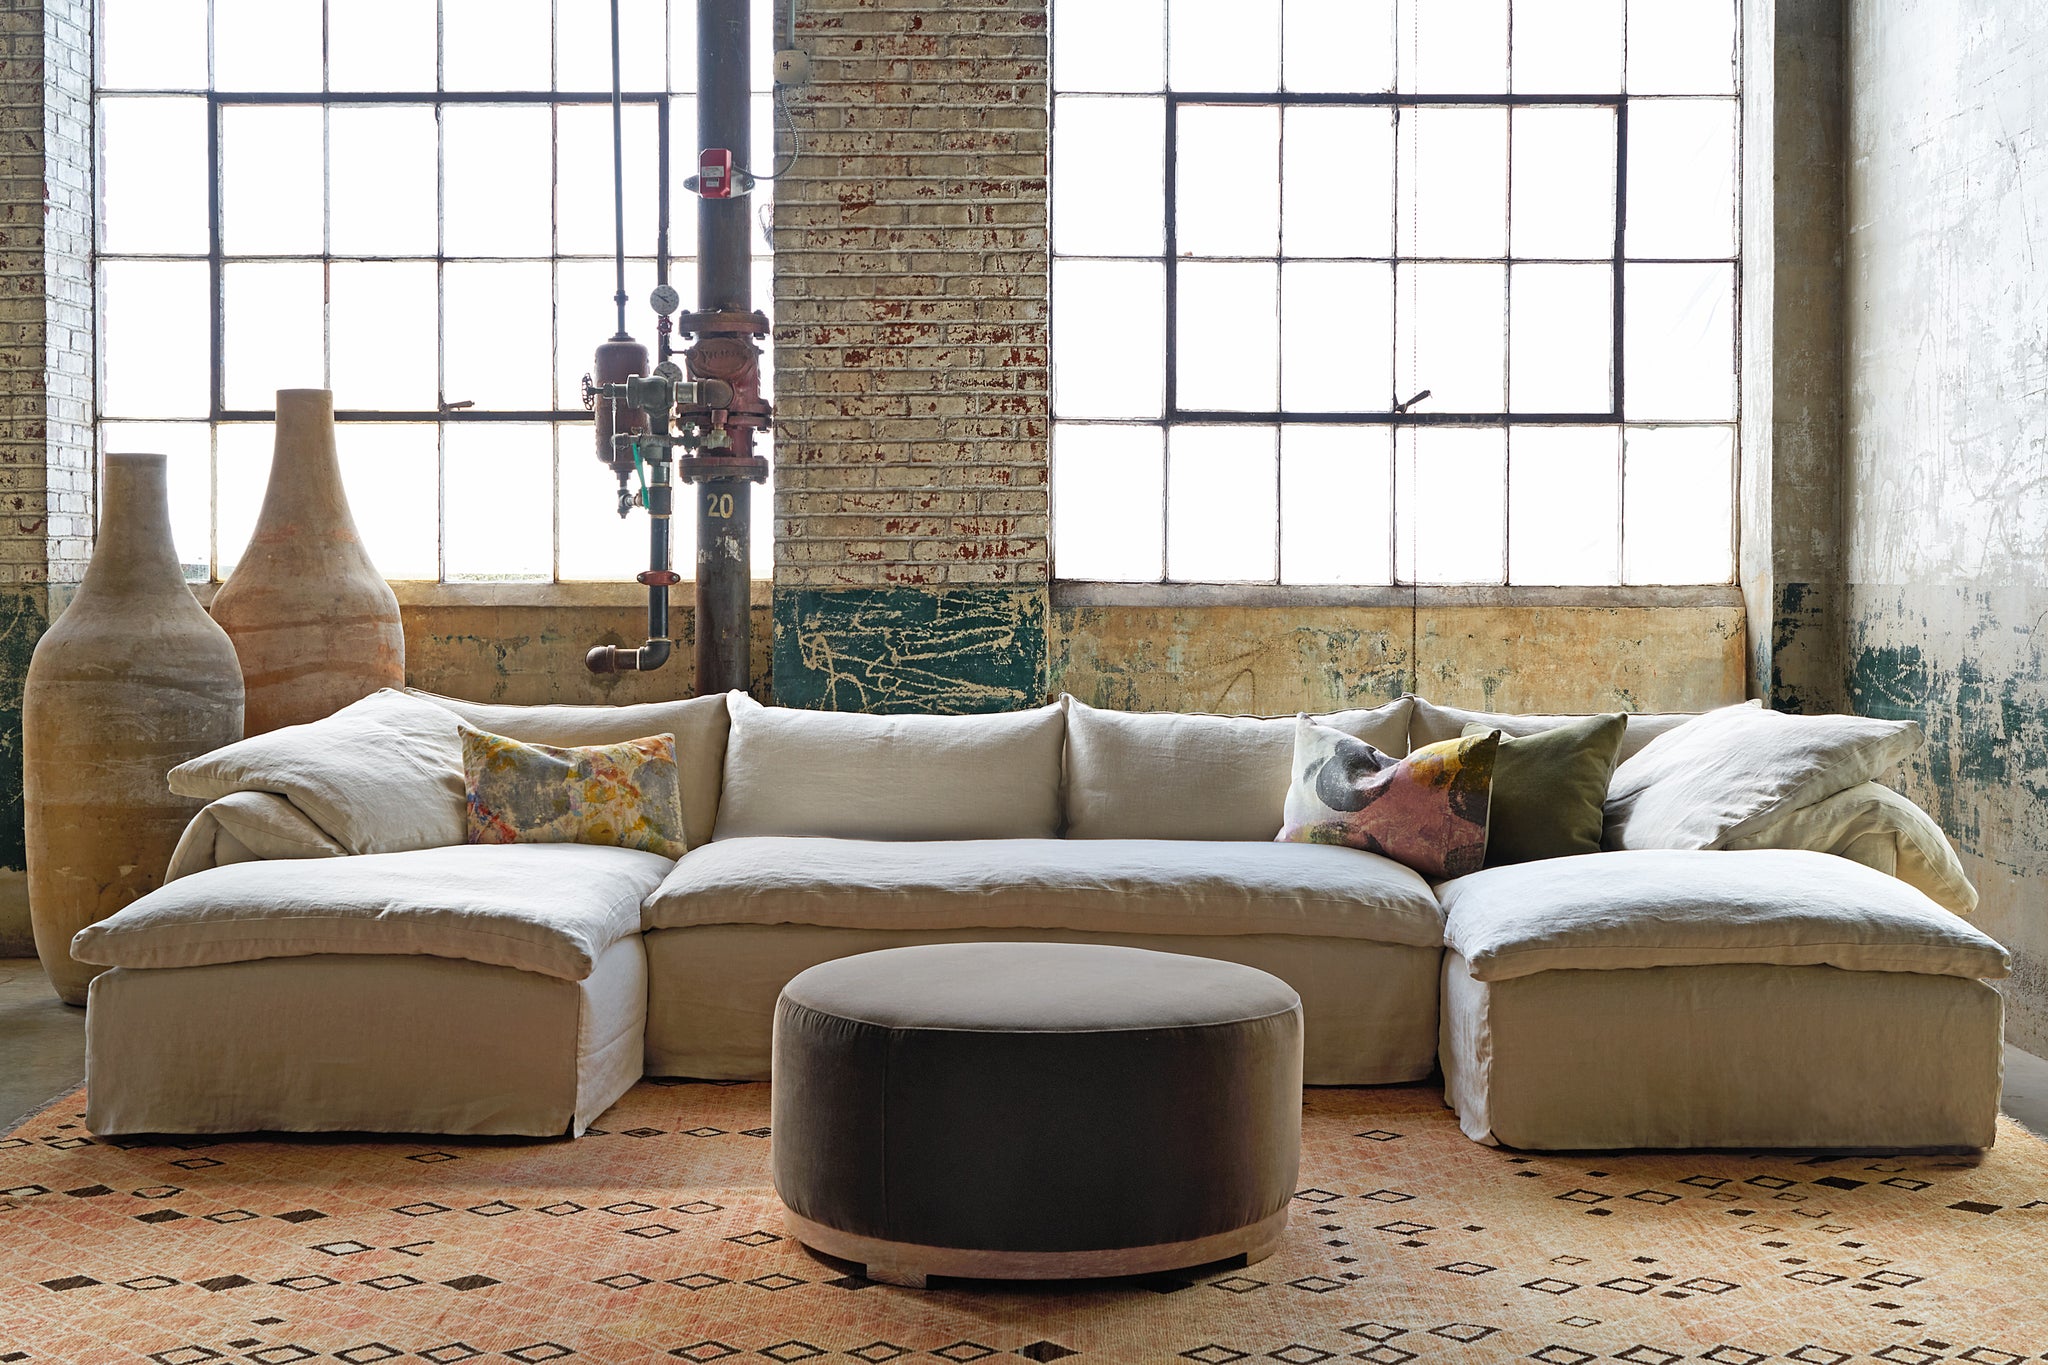  Large 3 piece sectional in front of windows with a pouf in front. Photographed in Noah Bone. 